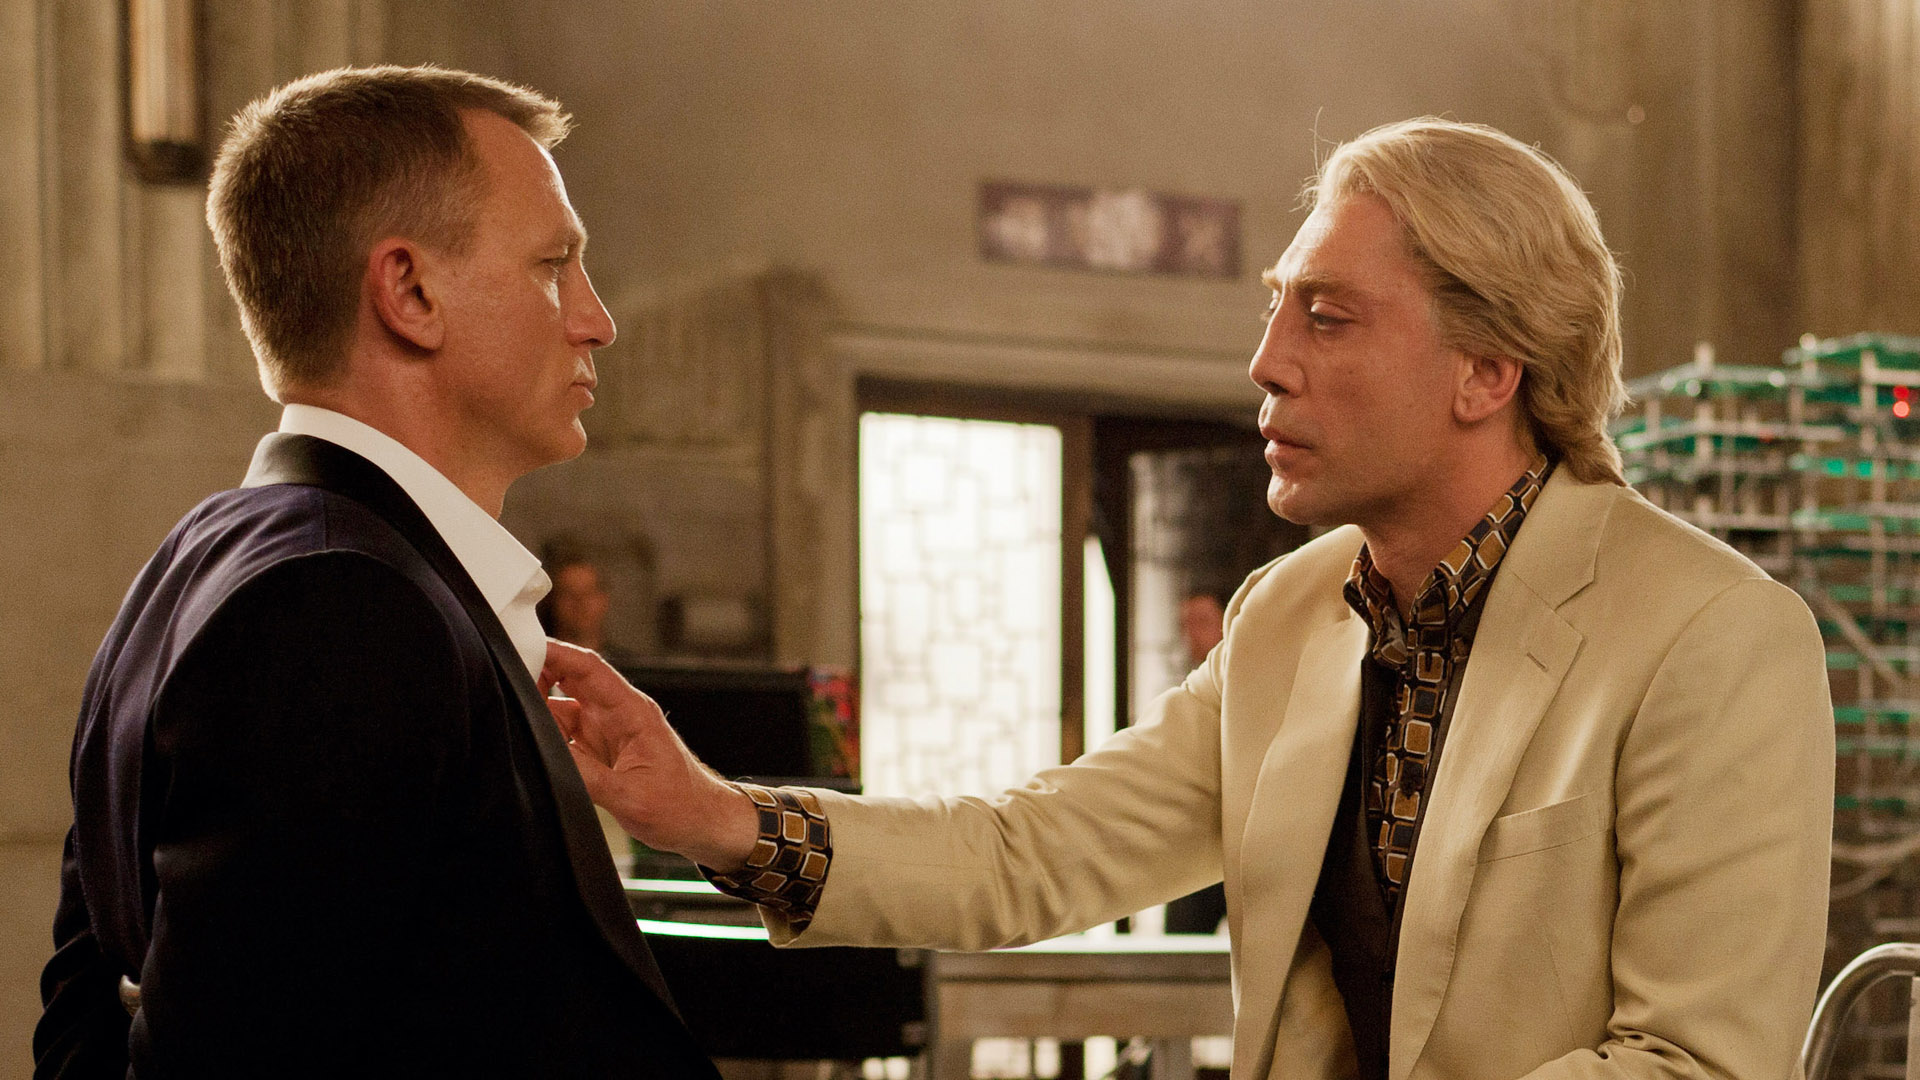 James Bond and Raoul Silva in Skyfall